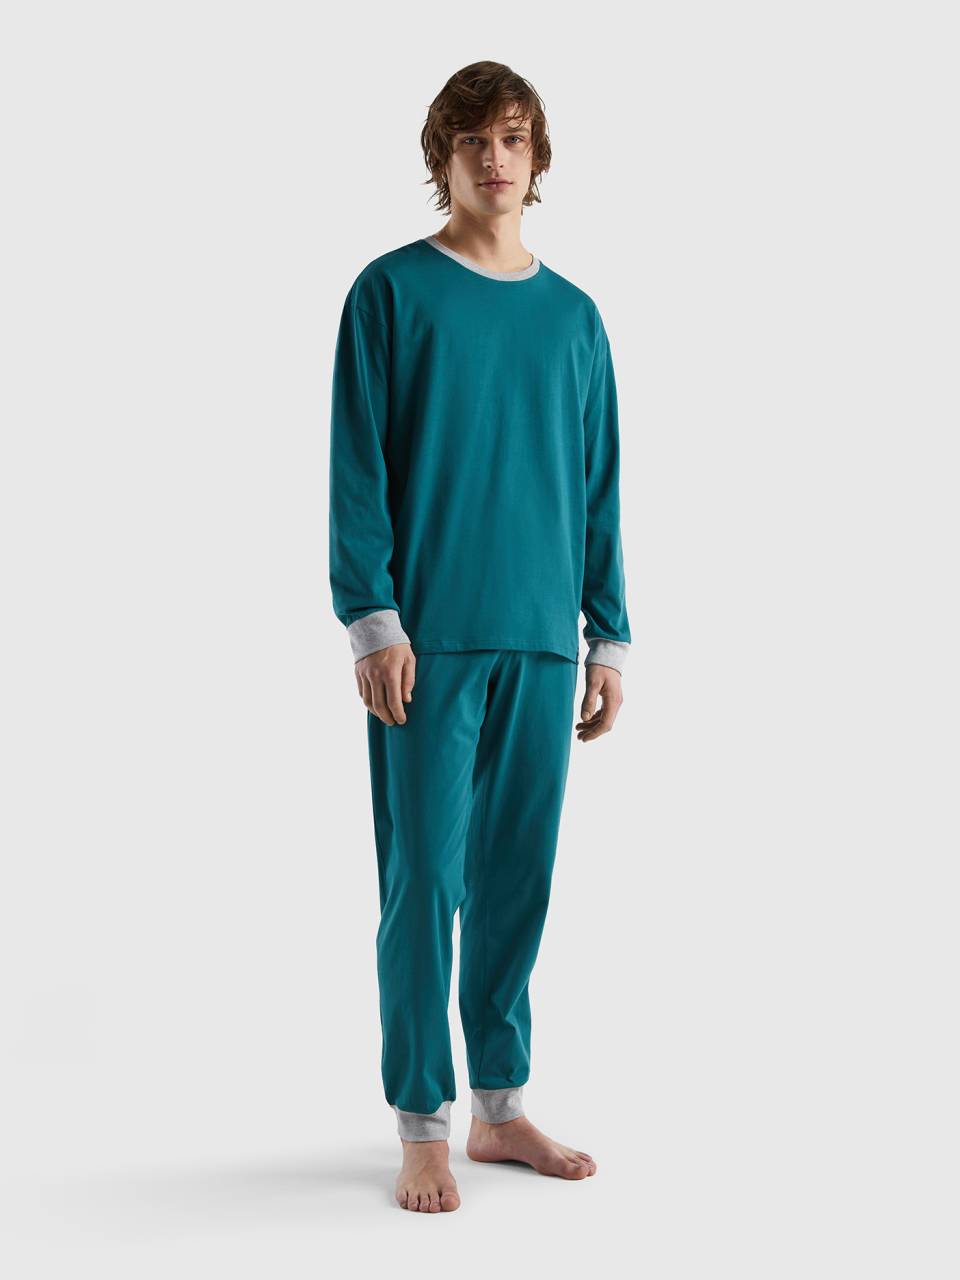 Benetton pyjamas with pouch in 100% cotton. 1